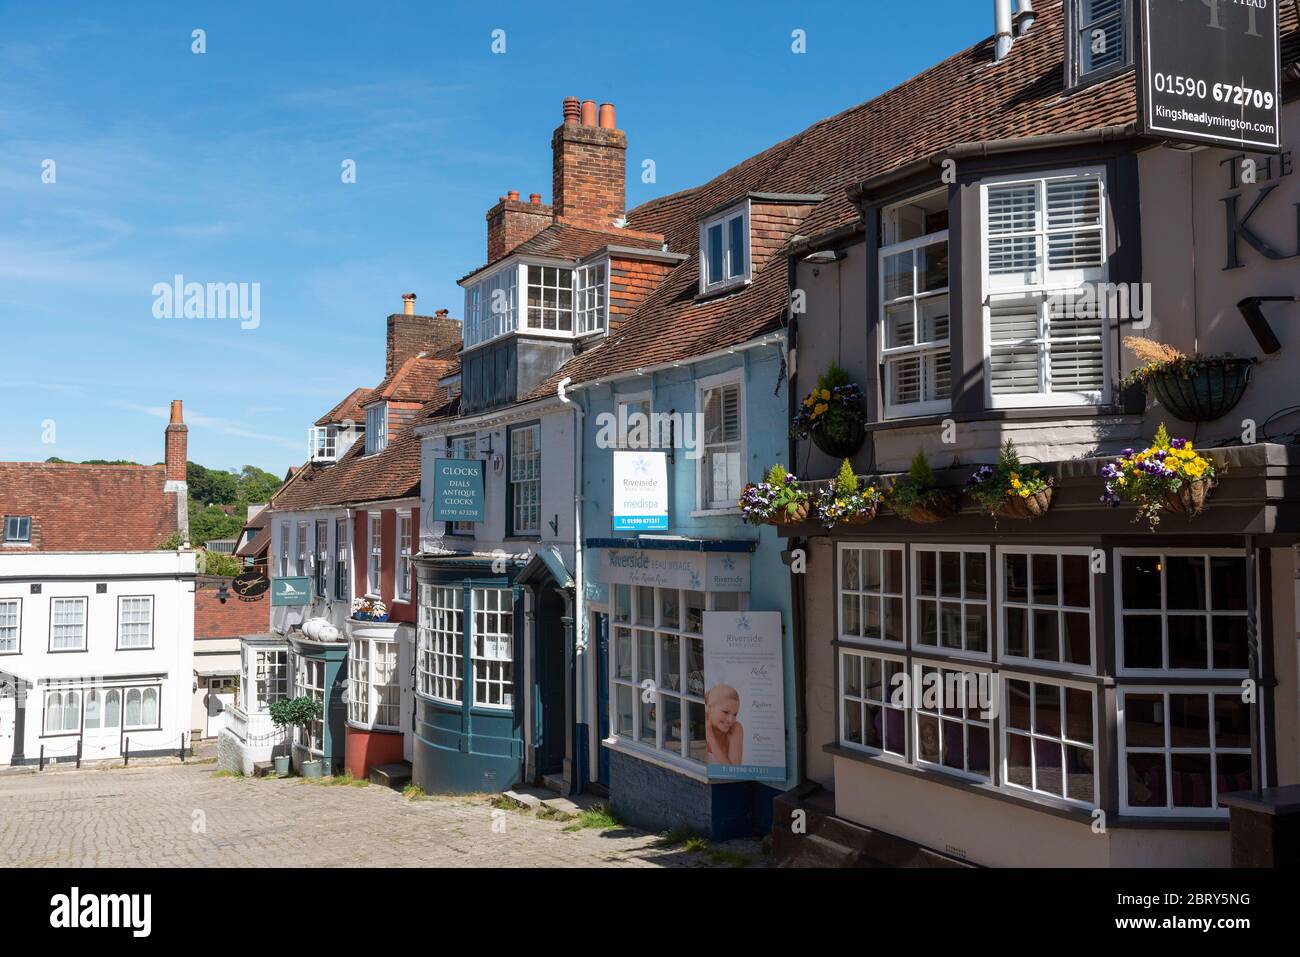 Lymington, Hampshire, England, UK. May 2020. Colourful properties on a  street in Lymington a small town in the New Forest area of southern England. Stock Photo